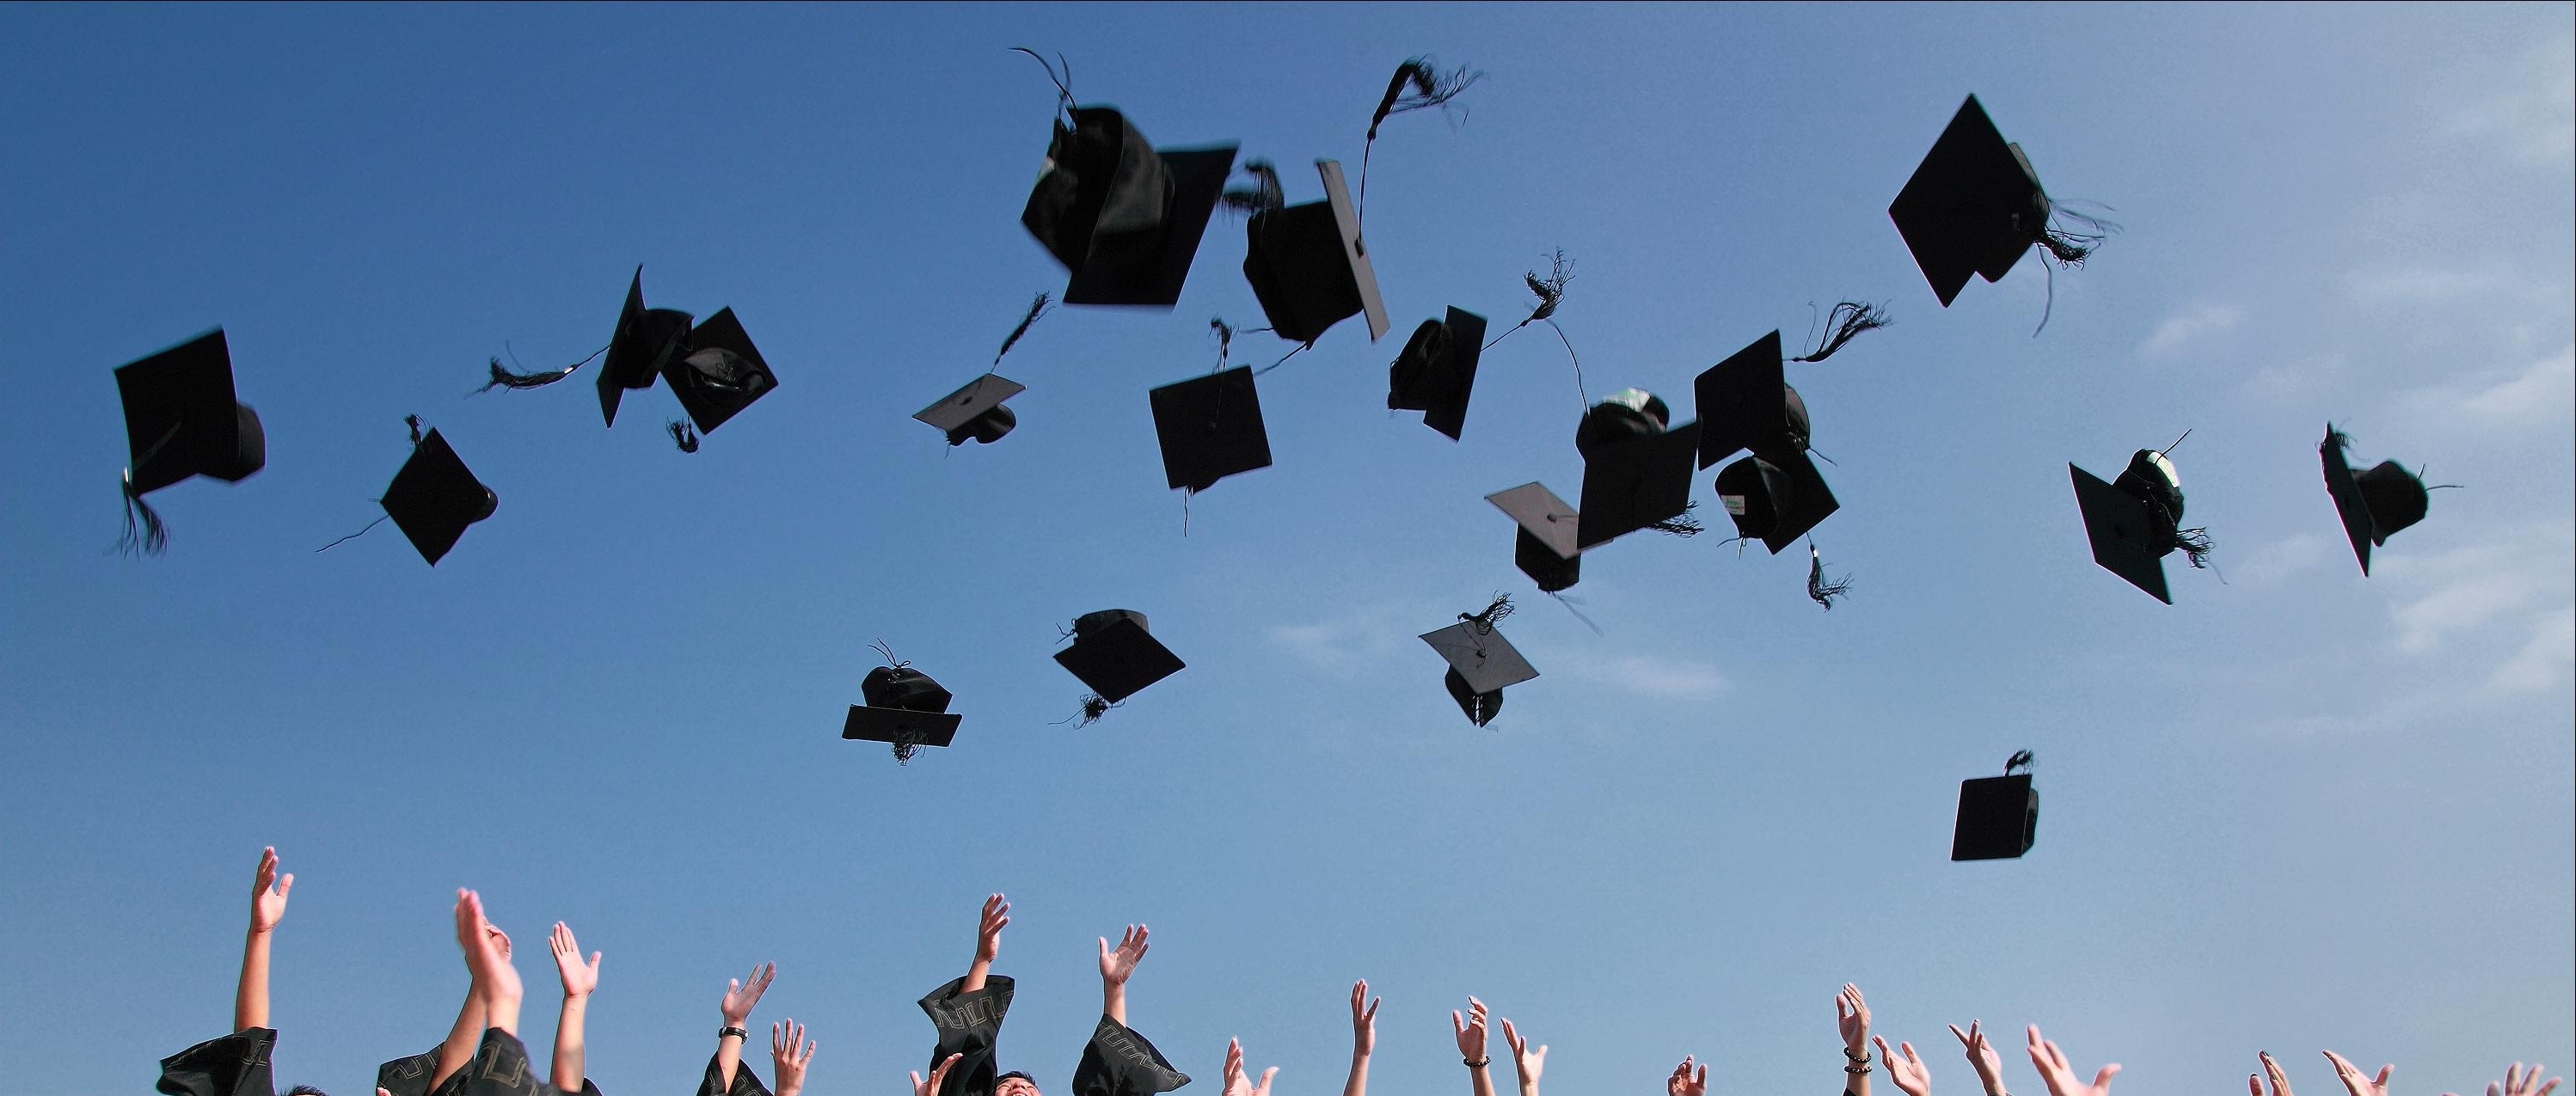 Mortarboards tossed in the air